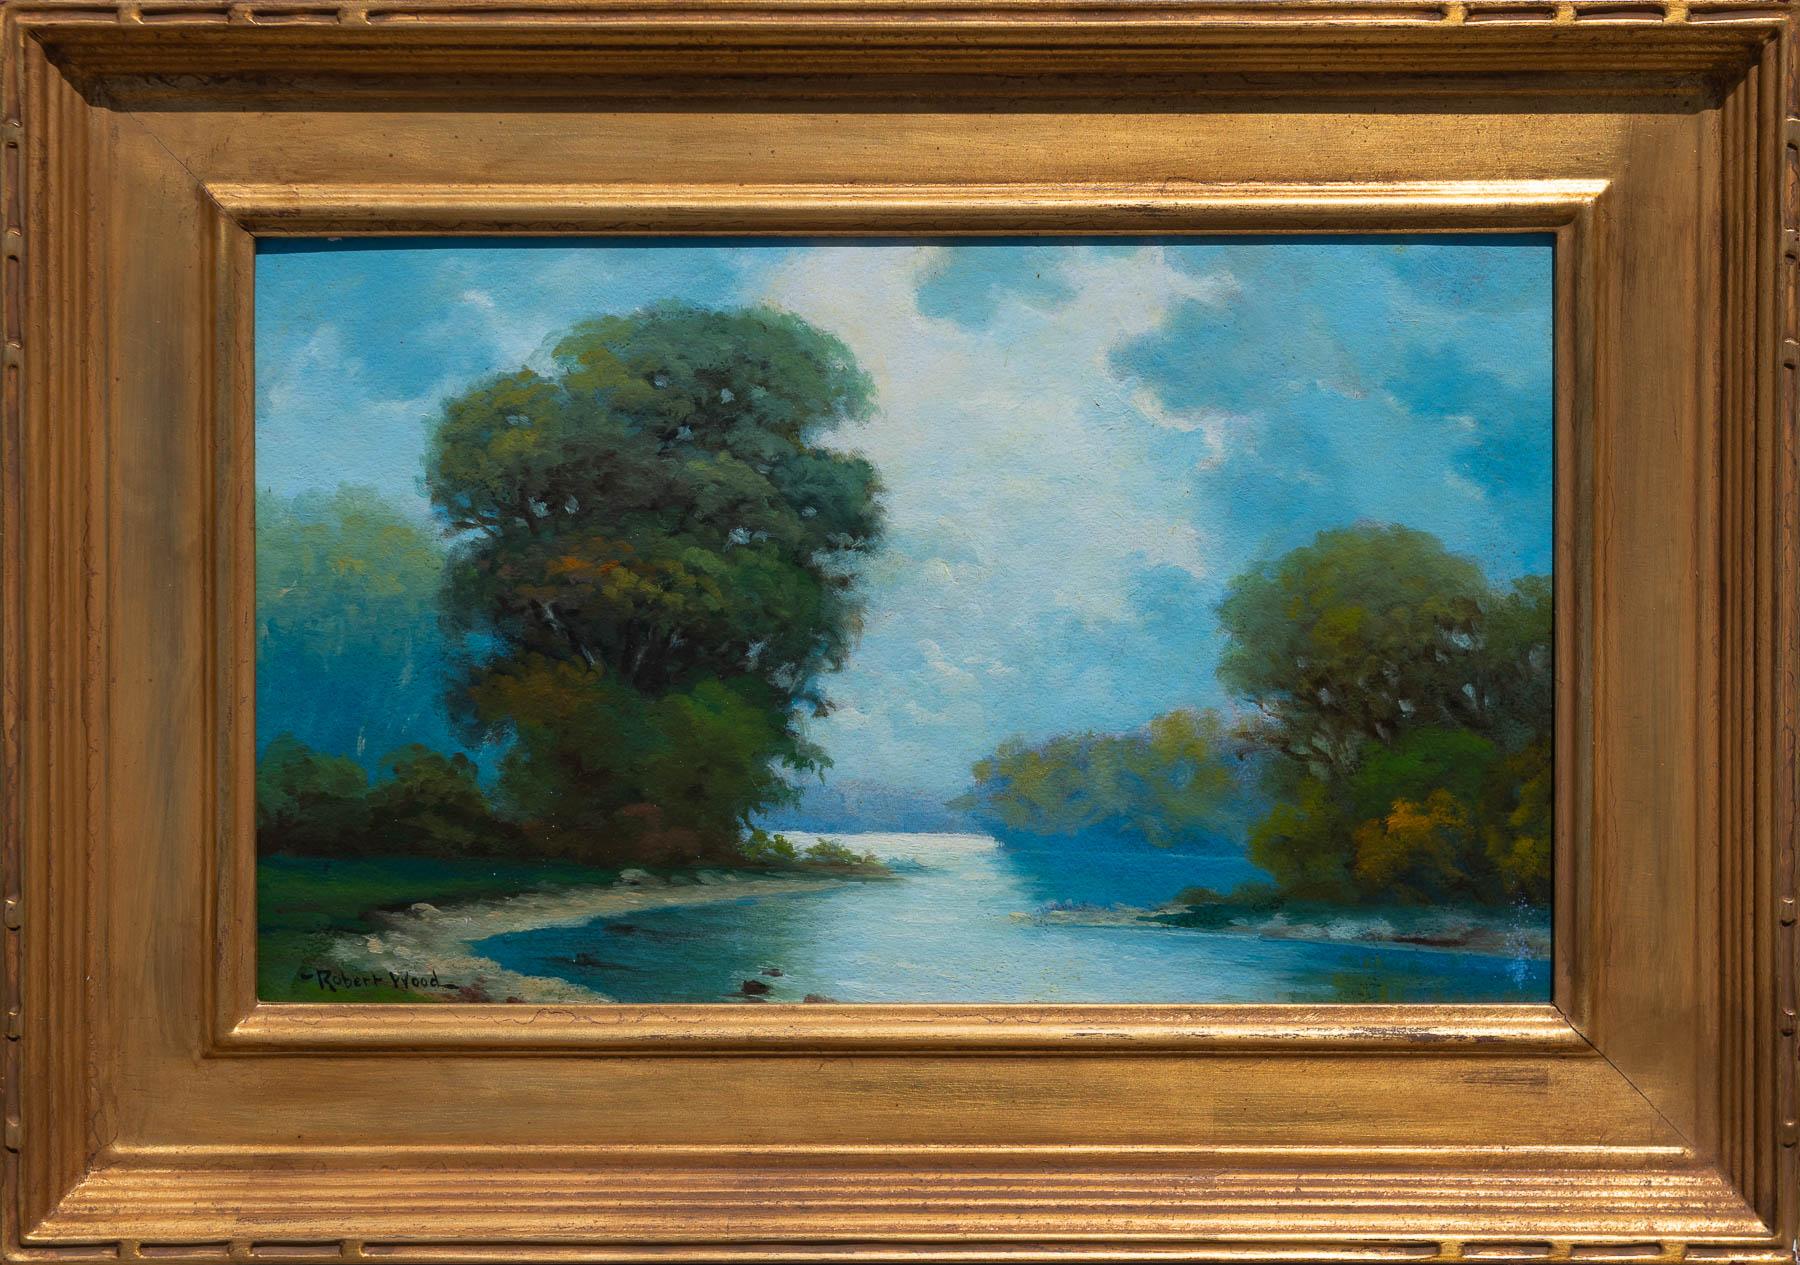 Oaks and stream - Painting by Robert Wood